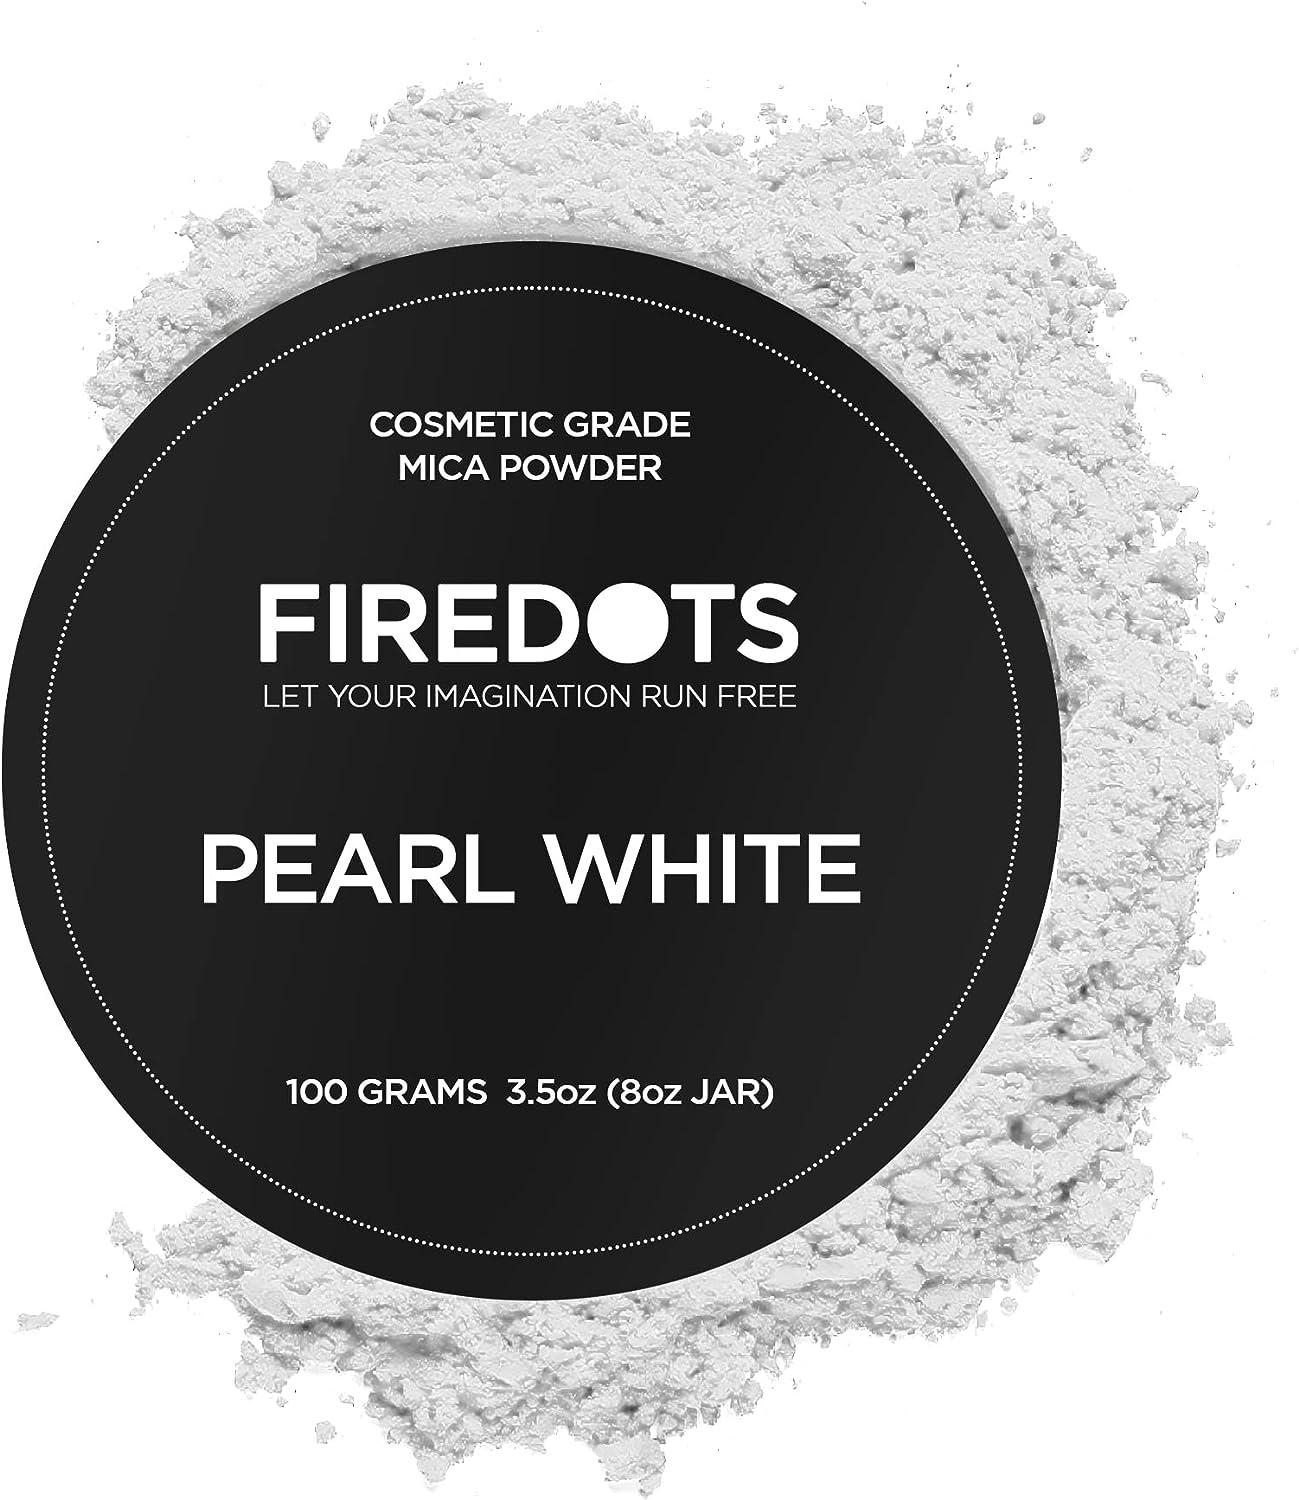 FIREDOTS Pearl White Mica Powder for Epoxy Resin Art Massive 100g Jar Easy  to Mix Epoxy Resin Pigment Powder for Soap Making Candle Making Body Butter  and Lip Gloss White Pigment Powder